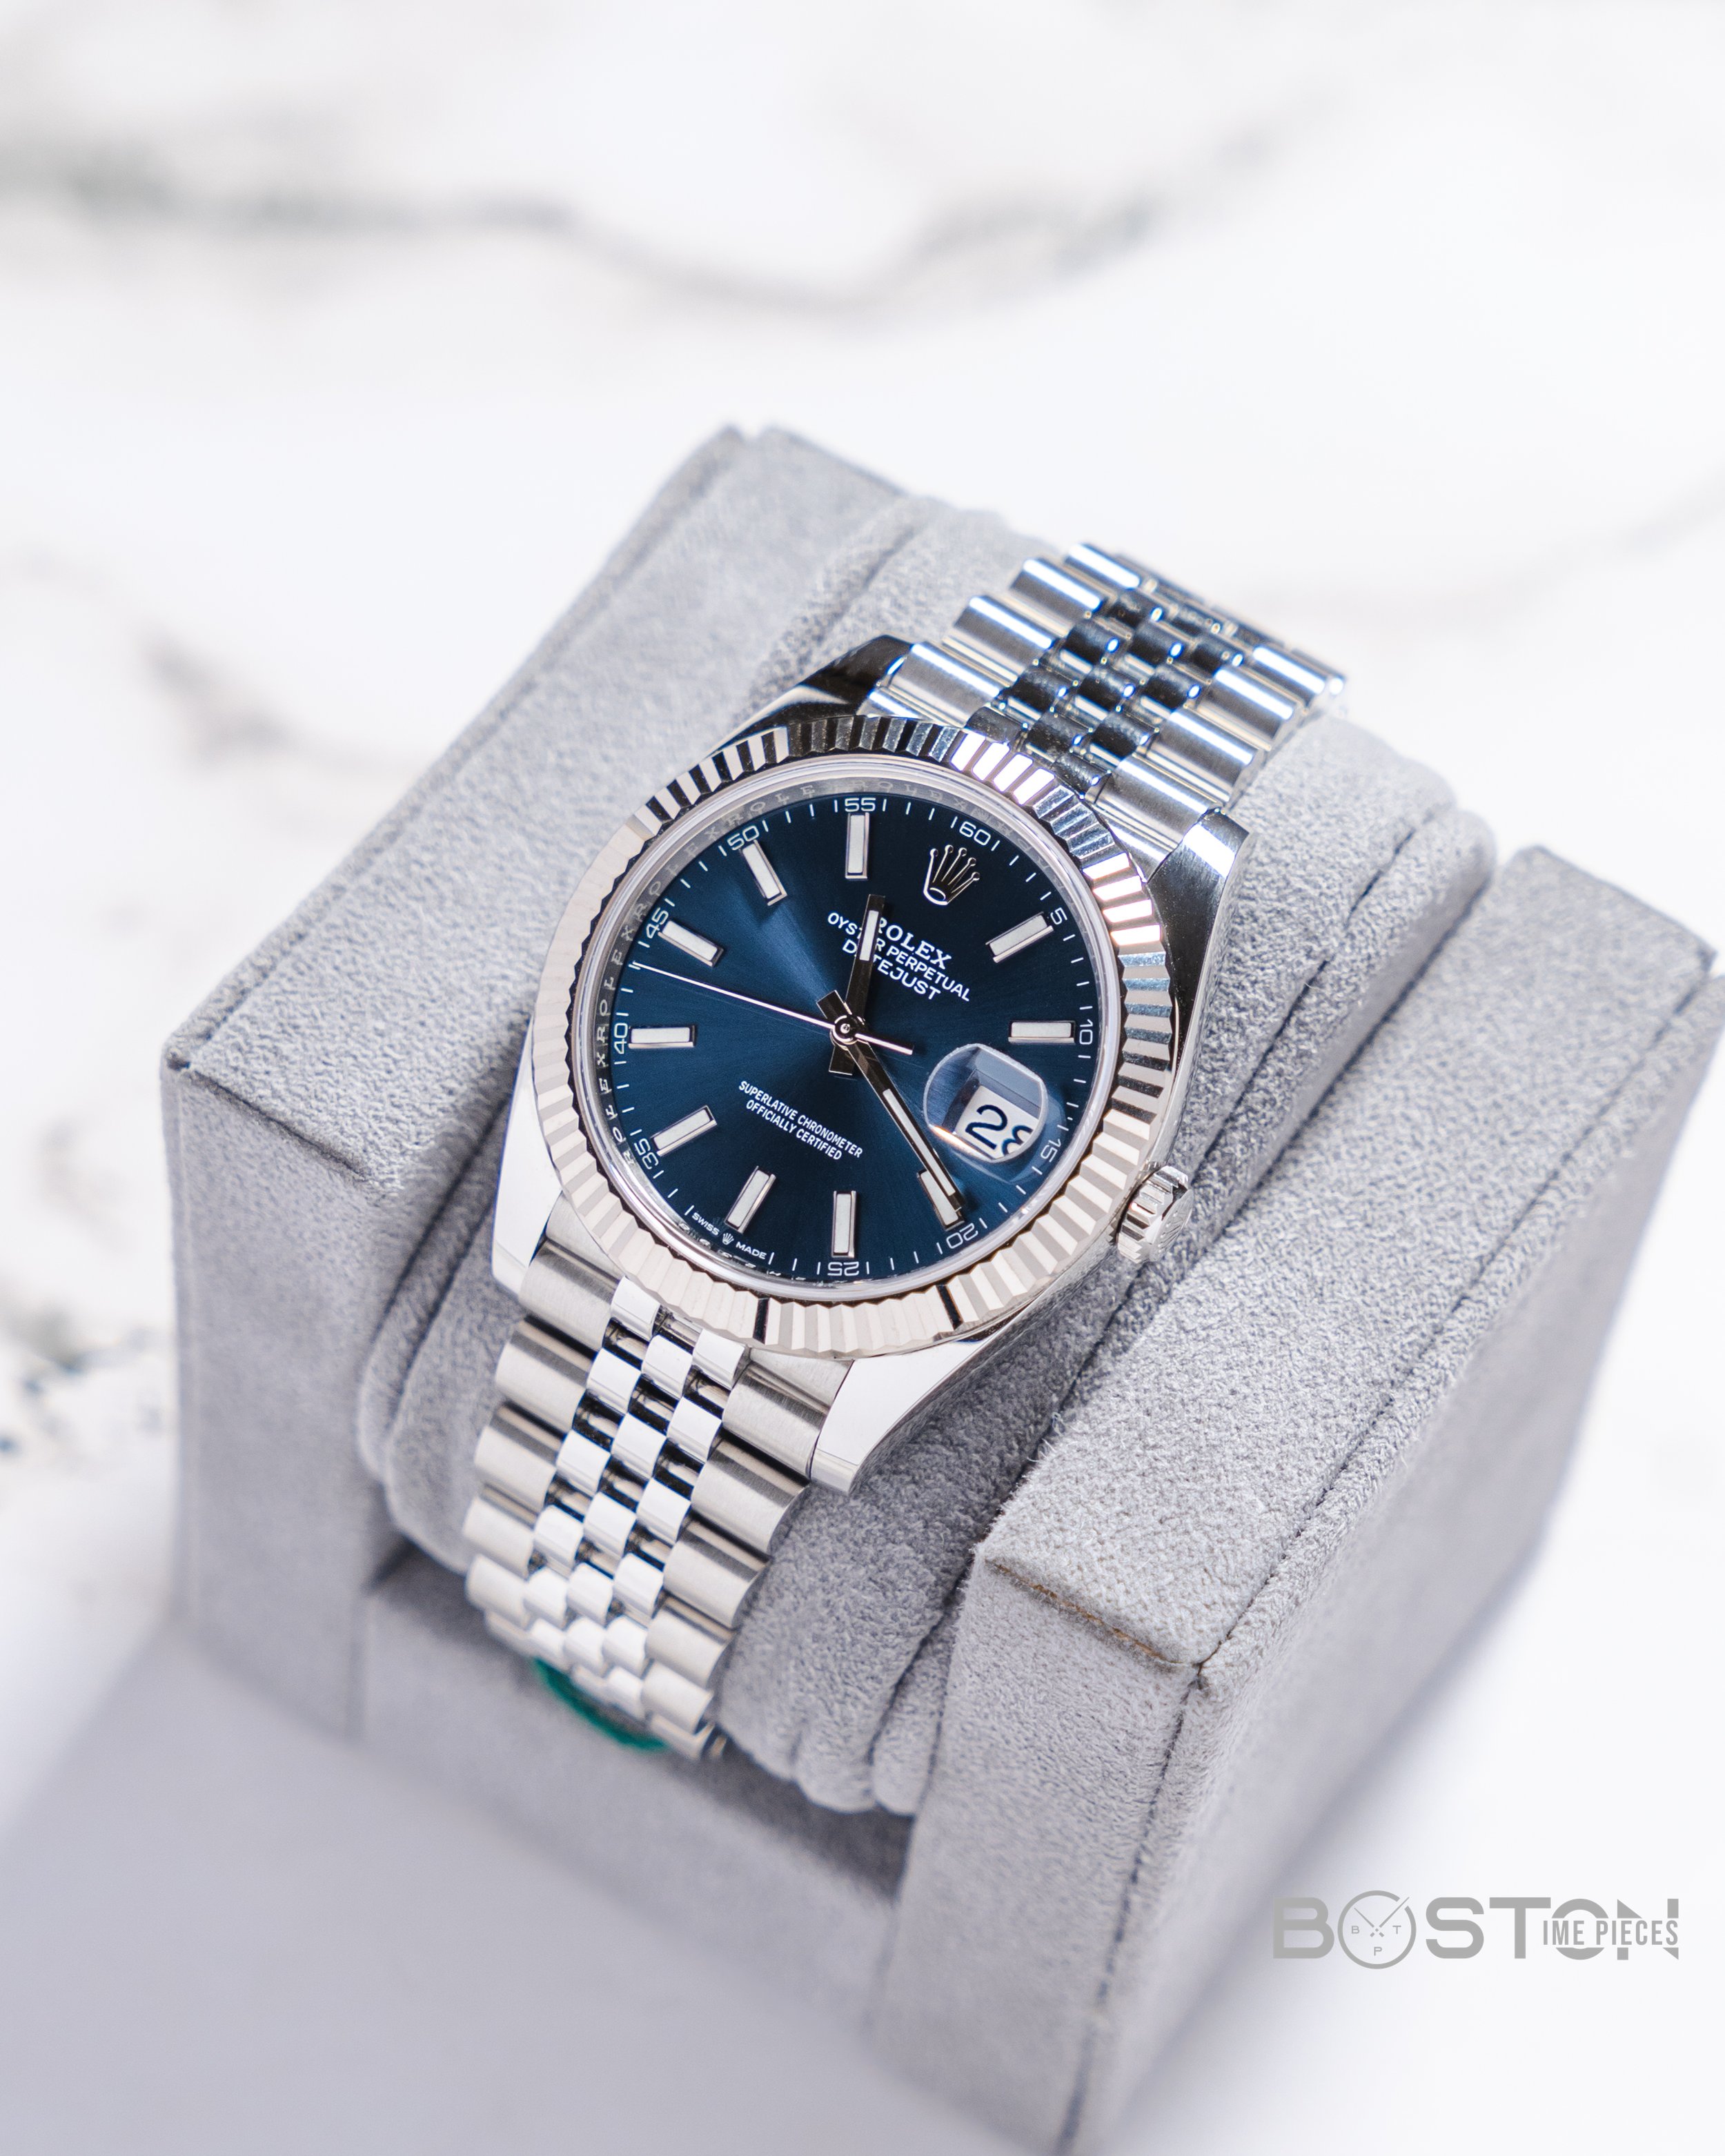 Hey guys, just wanted some options as I'm a bit indecisive. I have the  option to buy a 36mm datejust with a jubilee bracelet (the picture with the oyster  bracelet is just